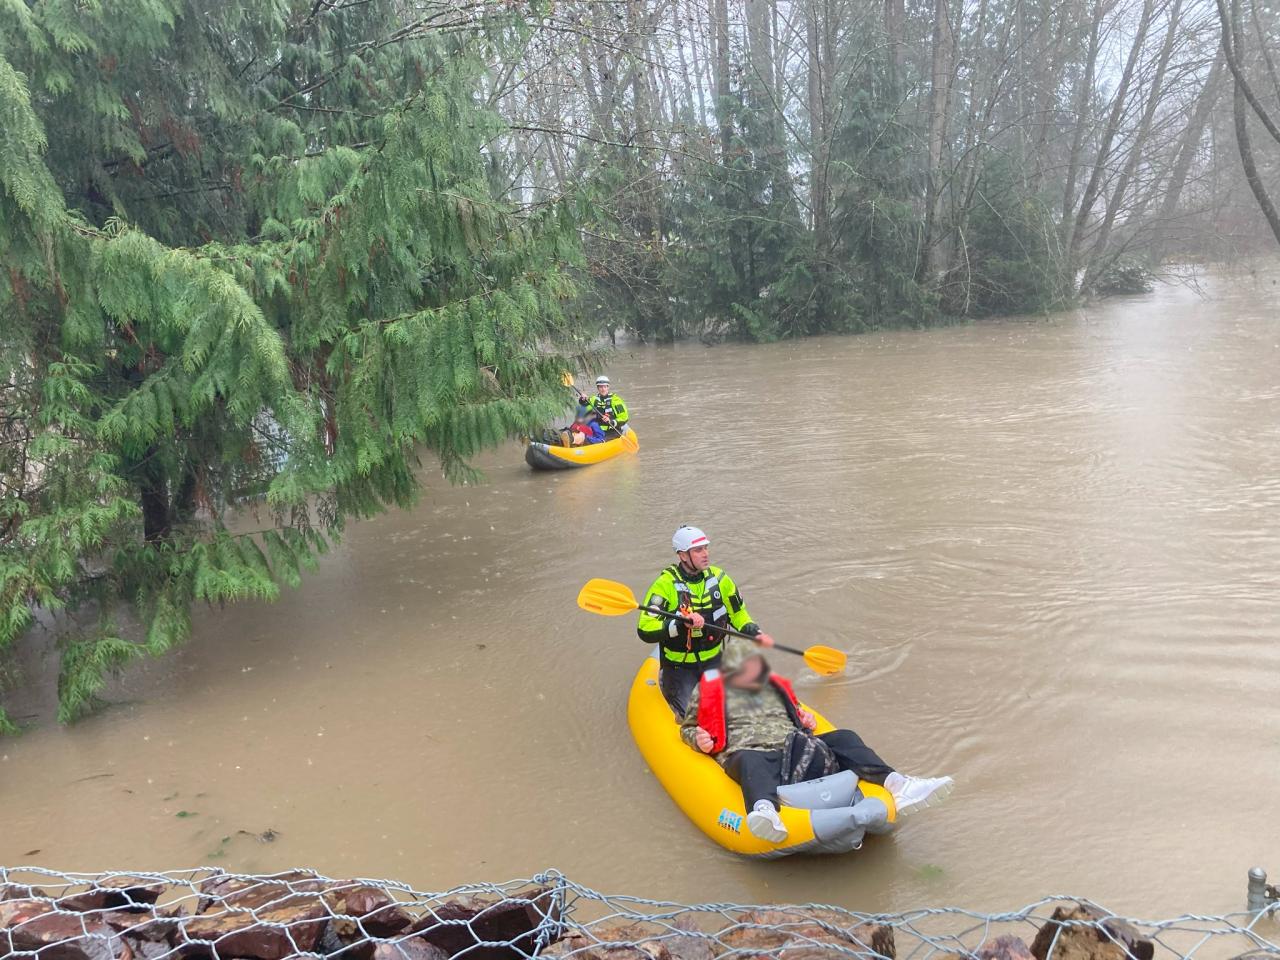 Weather report.  USA, floods in Washington state, record floods in Snohomish County